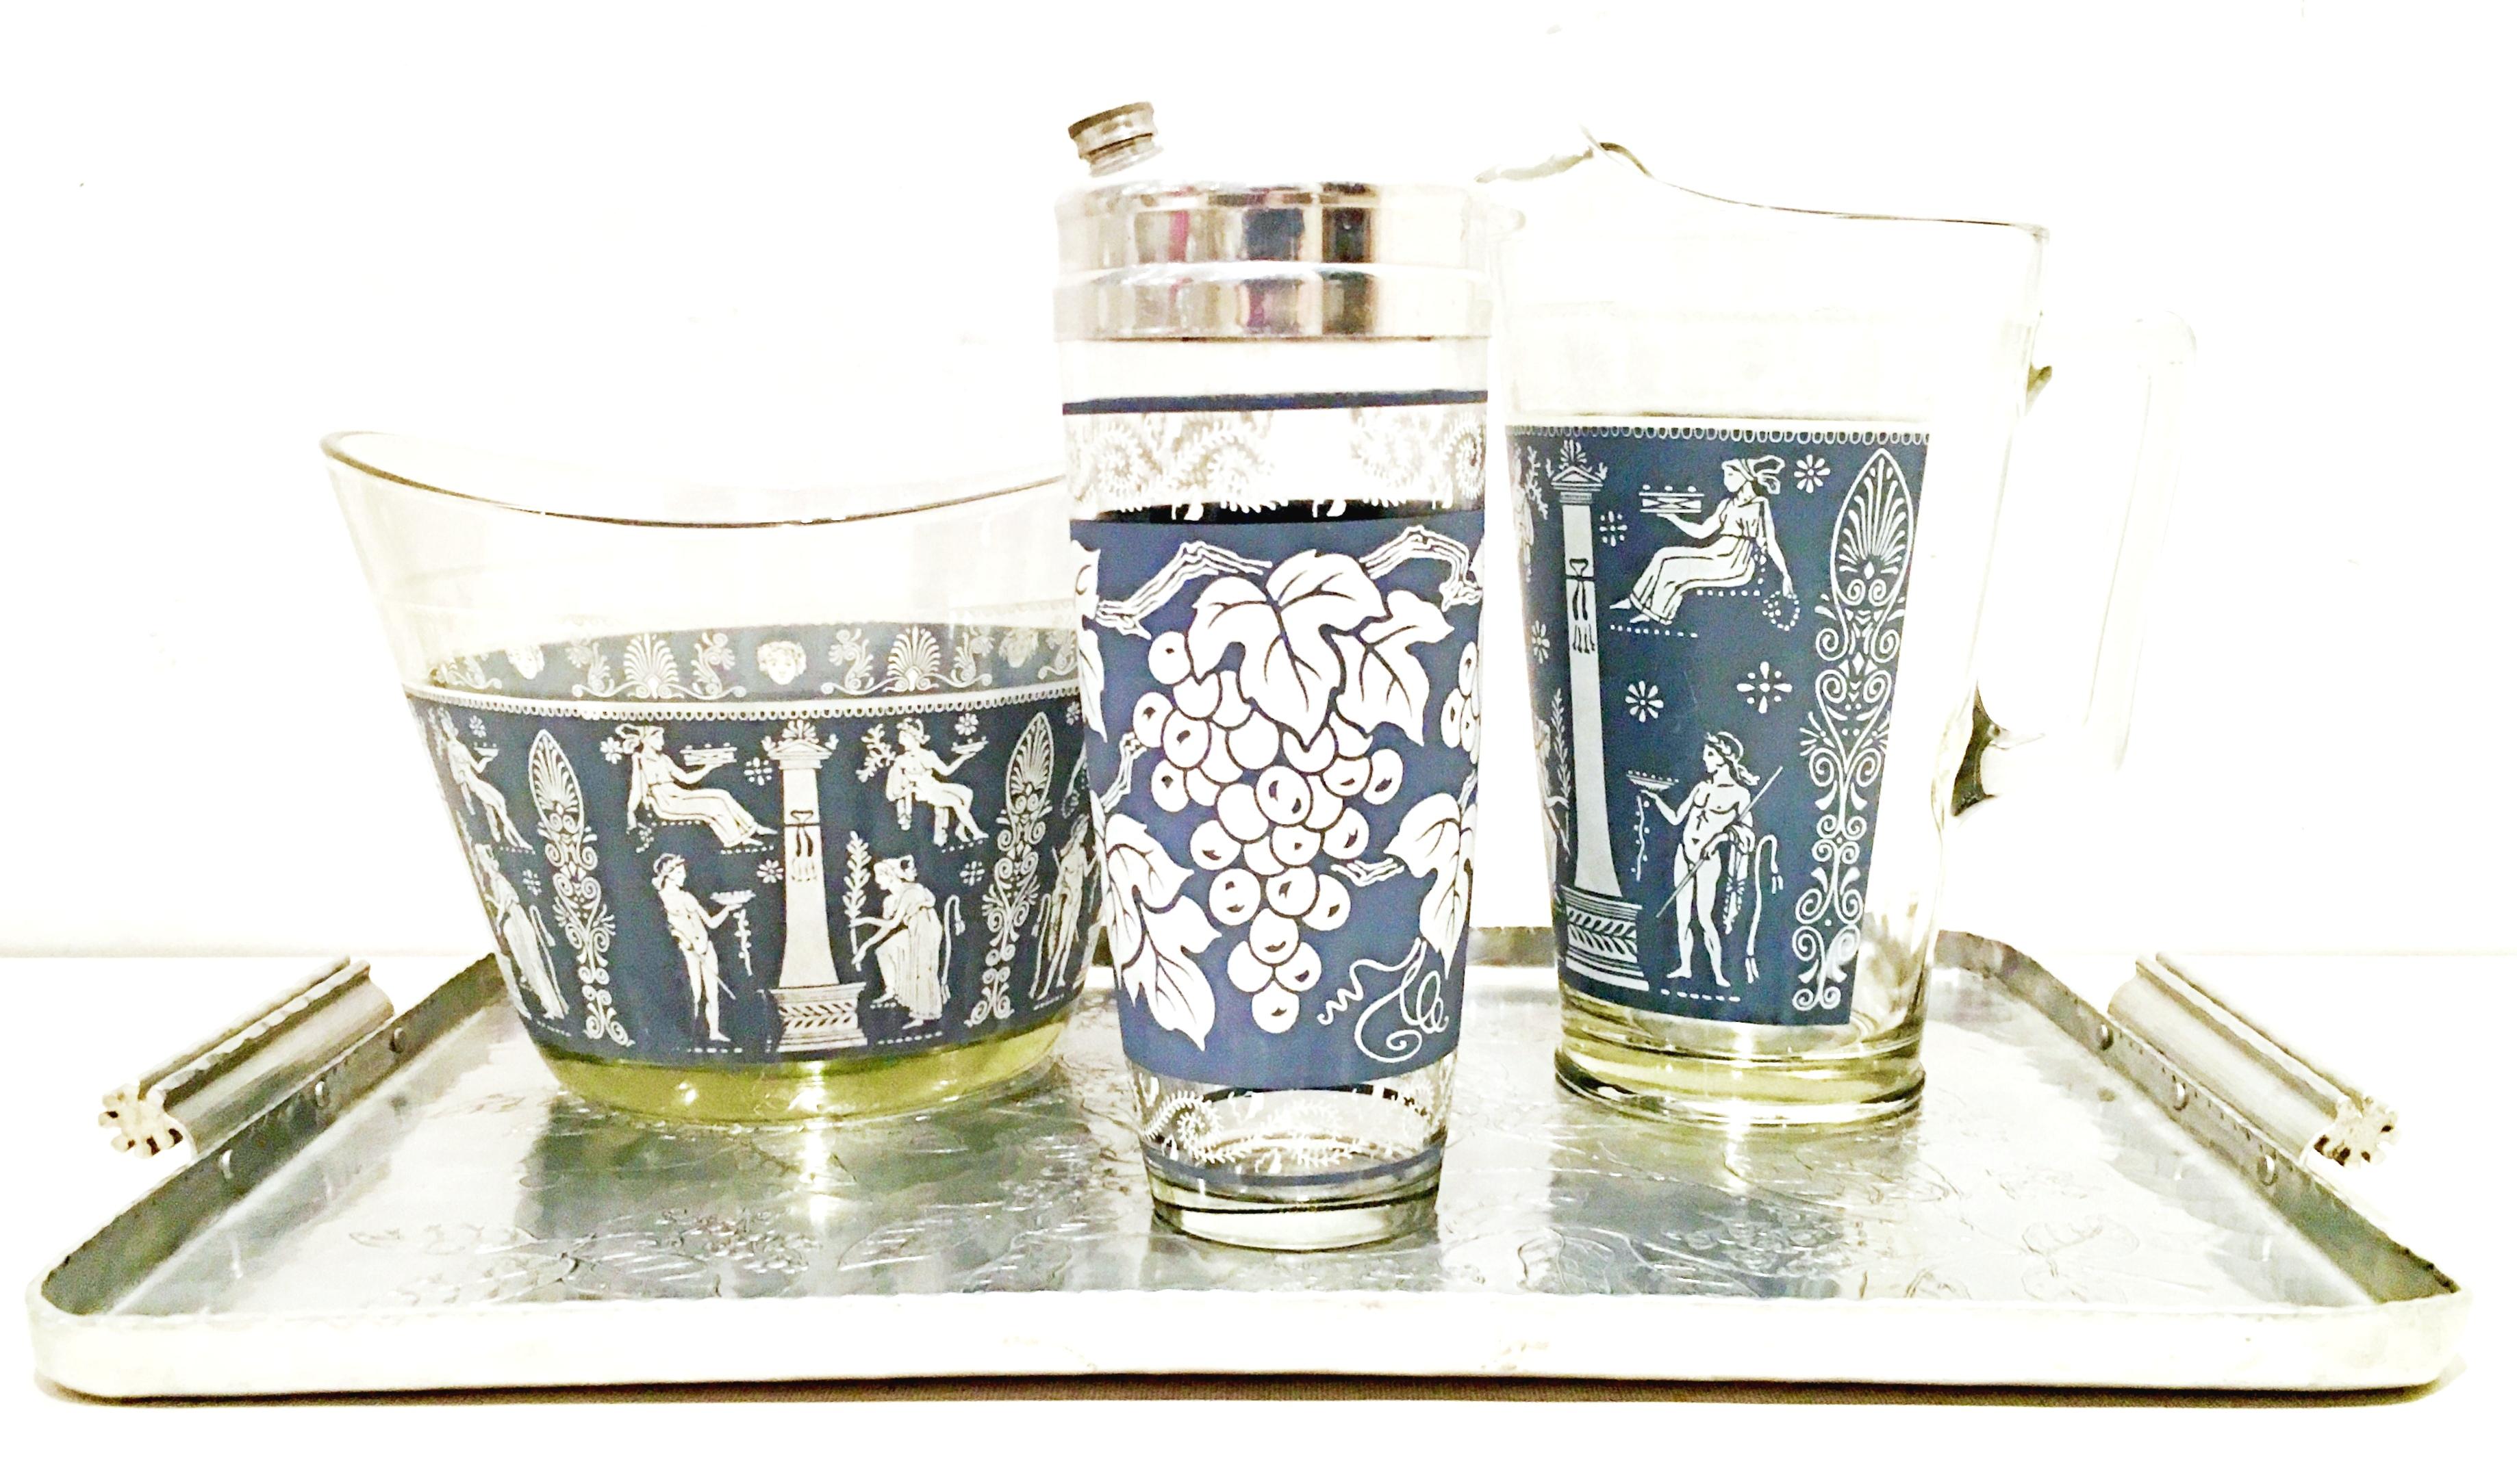 Mid-20th Century American printed glass & silver hammered tray drinks S/4. This 4 piece set includes, 1 silver rectangular tray, 1 glass pitcher, 1 glass and chrome 3 piece cocktail shaker and oval shaped glass champagne or ice bucket. The printed